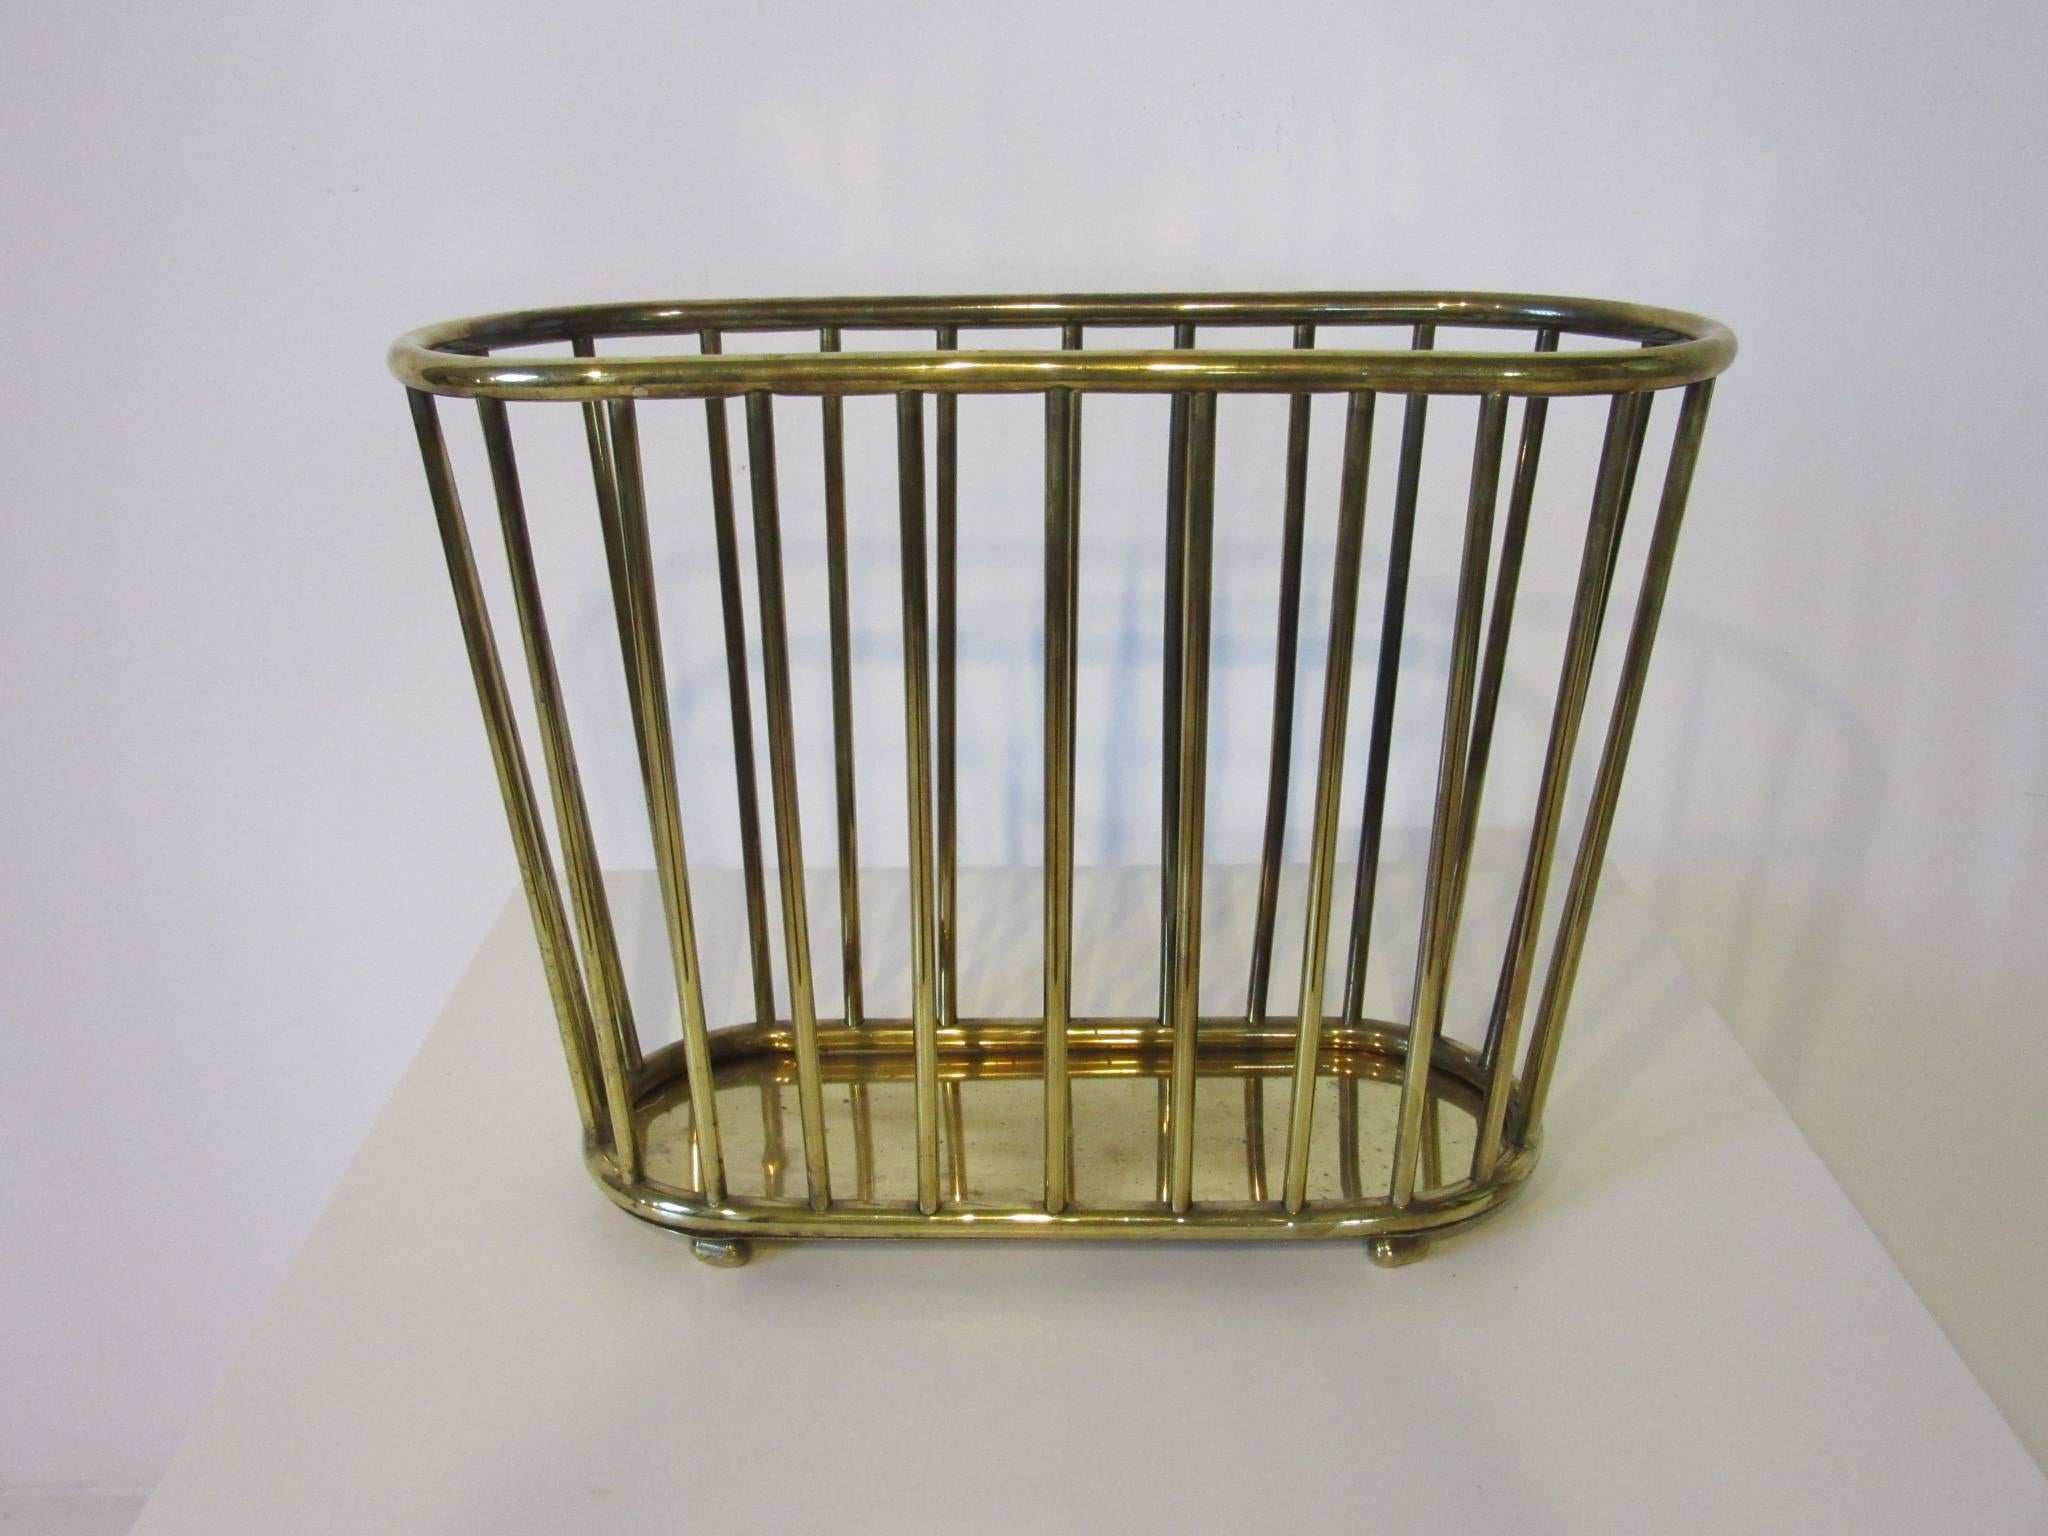 A brass magazine rack in the manner of Edward Wormley in a simple elegant style, marked to the inside bottom made by Gumps, San Francisco.